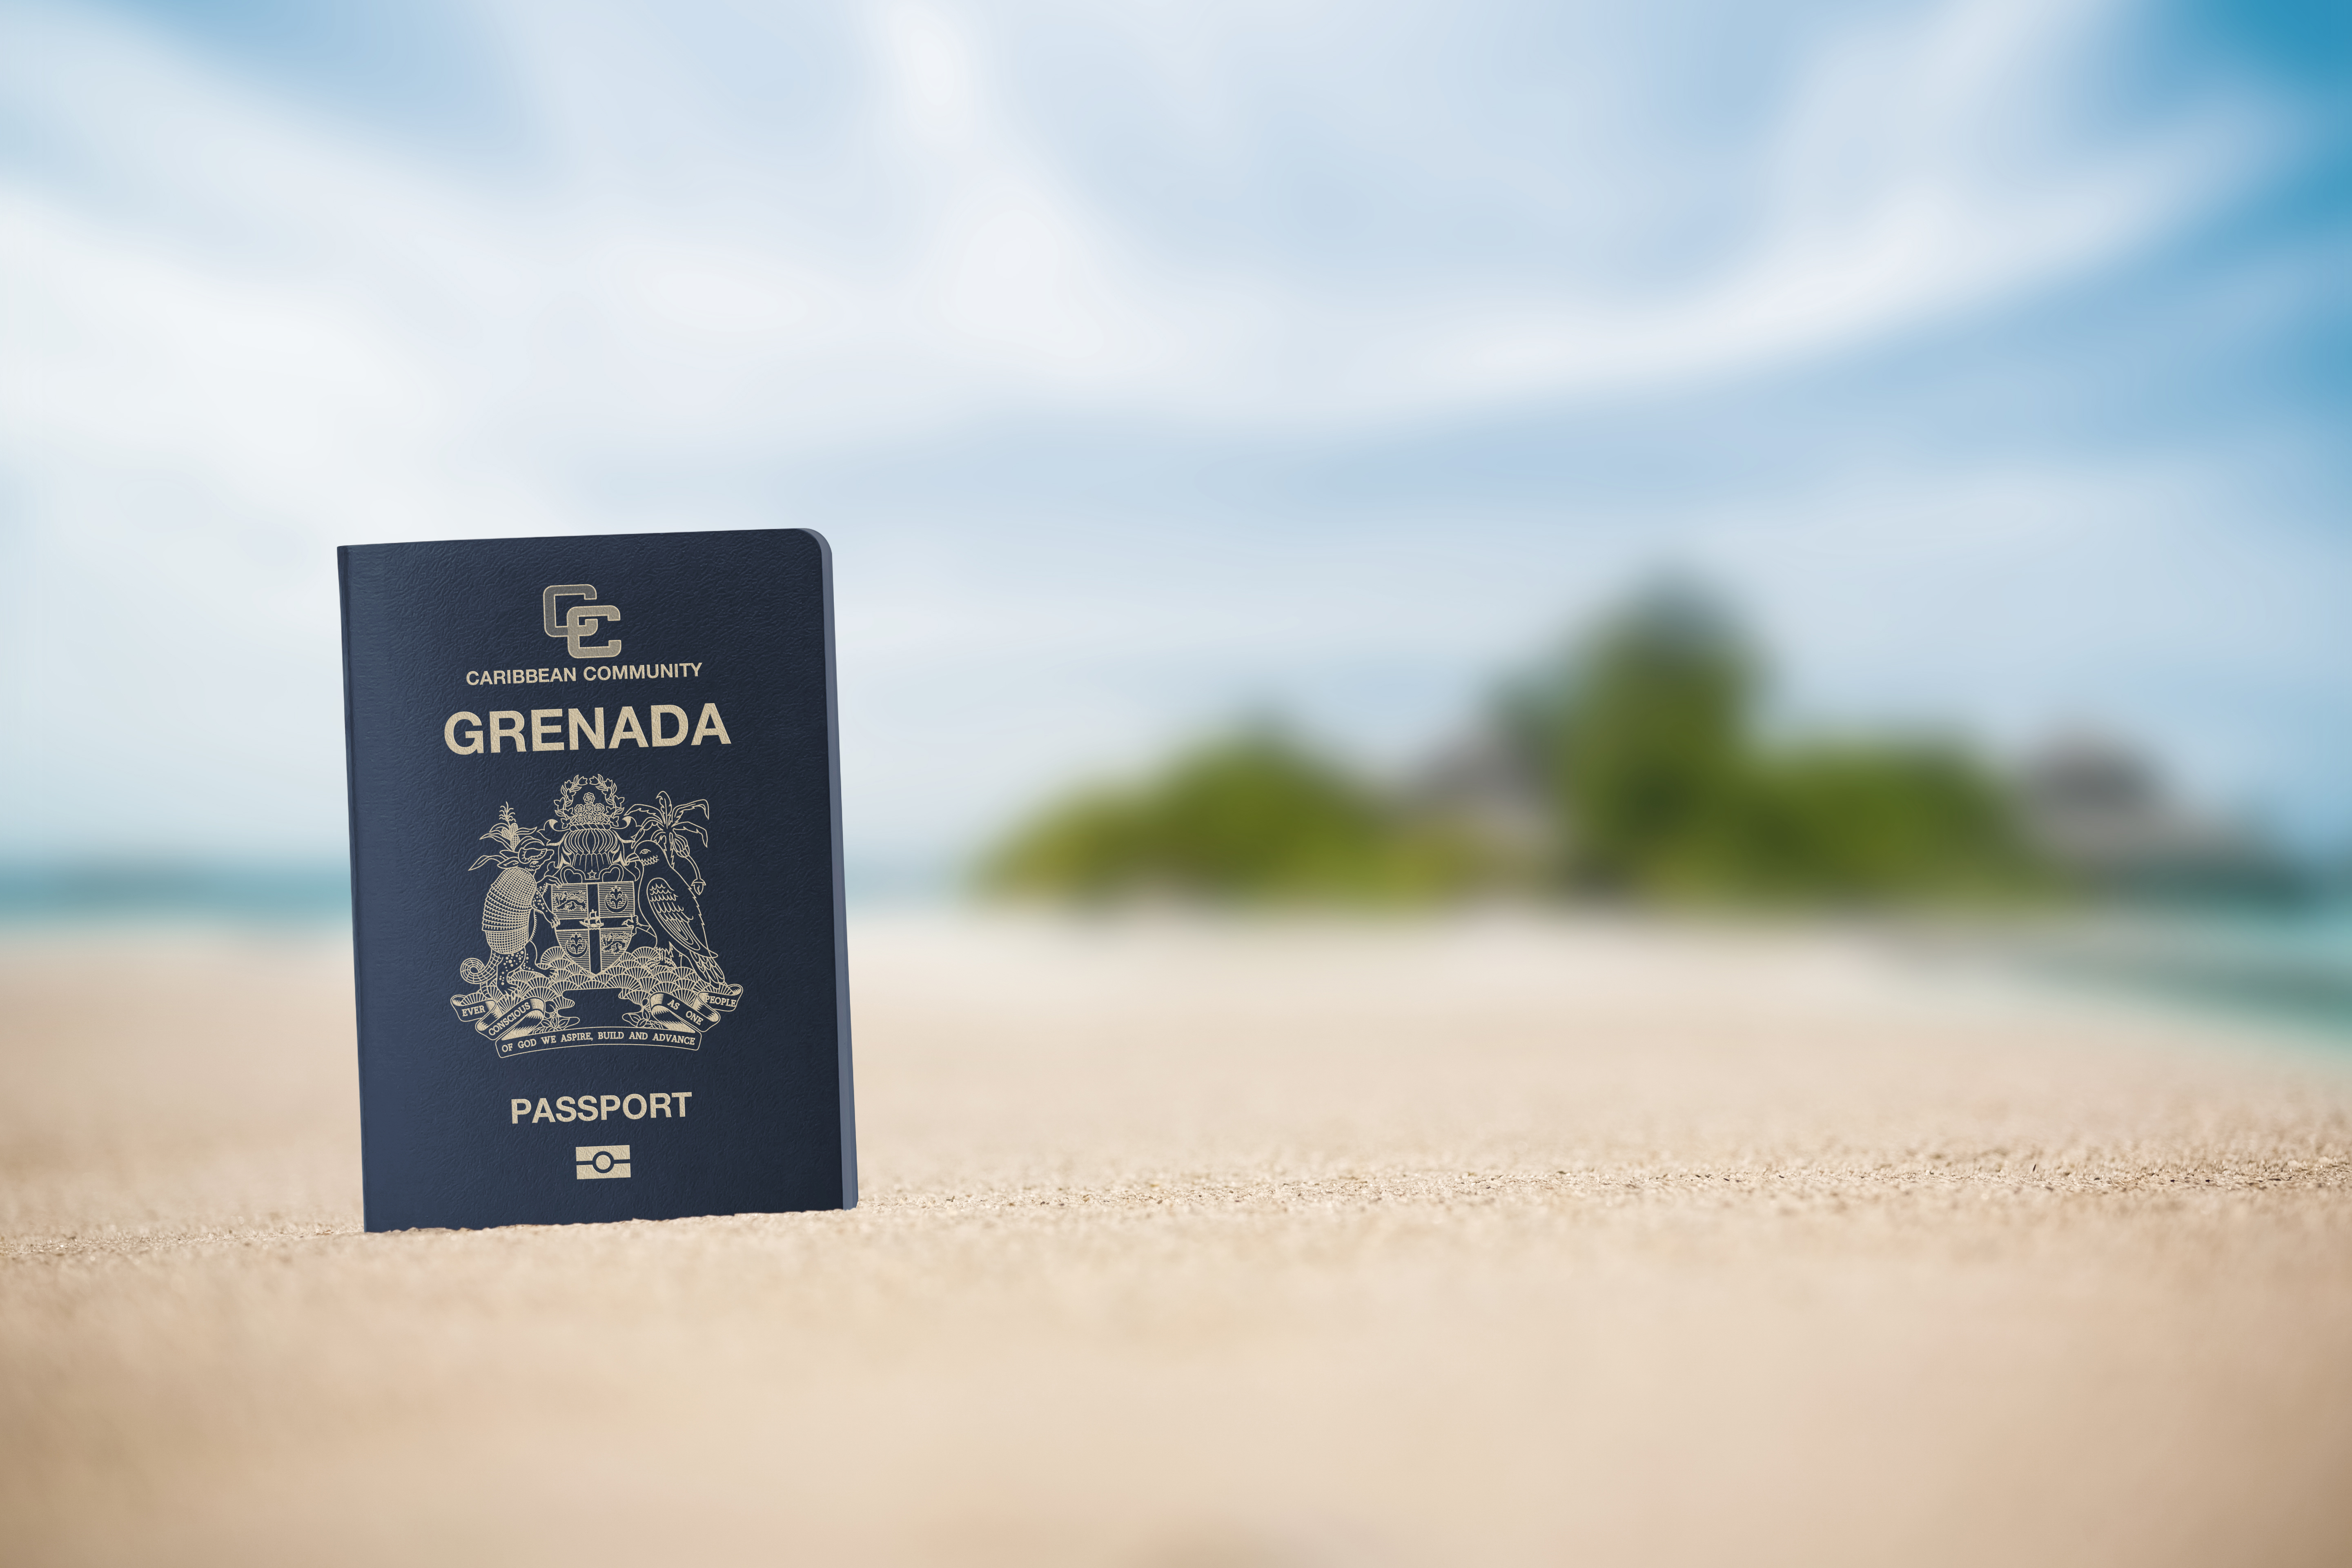 Passport on the background of the coast of Grenada symbolizes the citizenship of the Caribbean islands